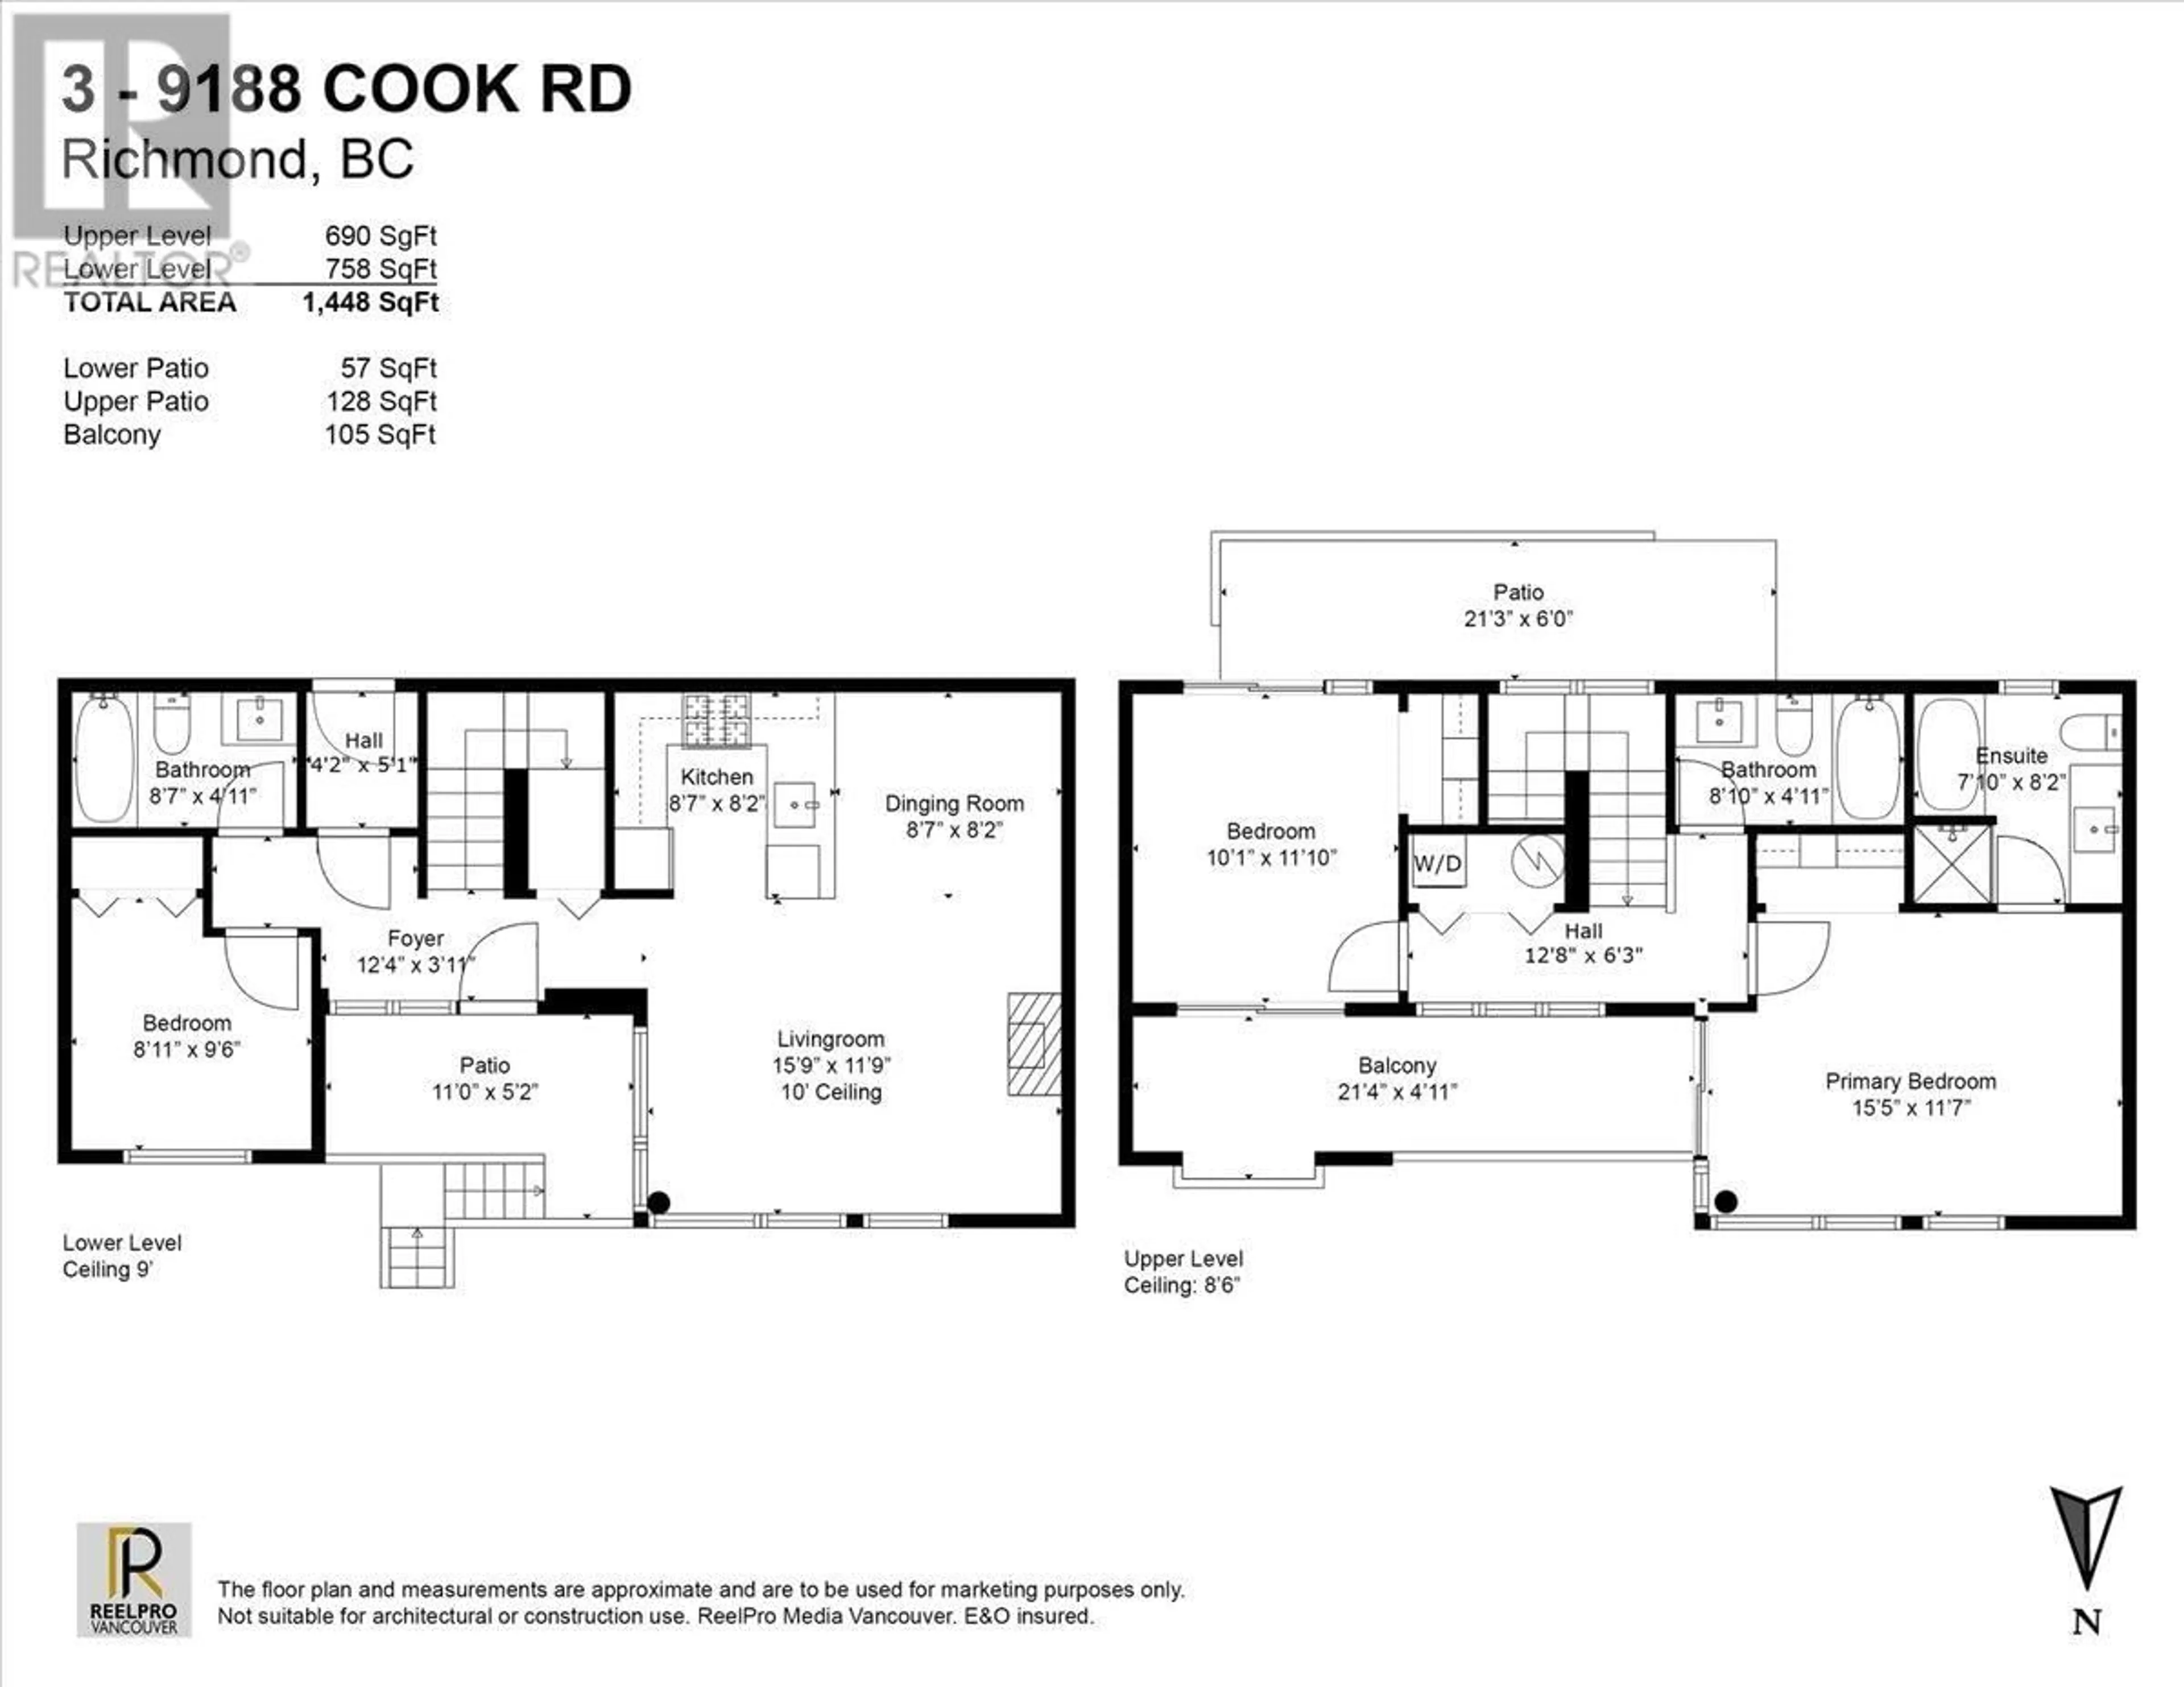 Floor plan for 3 9188 COOK ROAD, Richmond British Columbia V6Y4M1